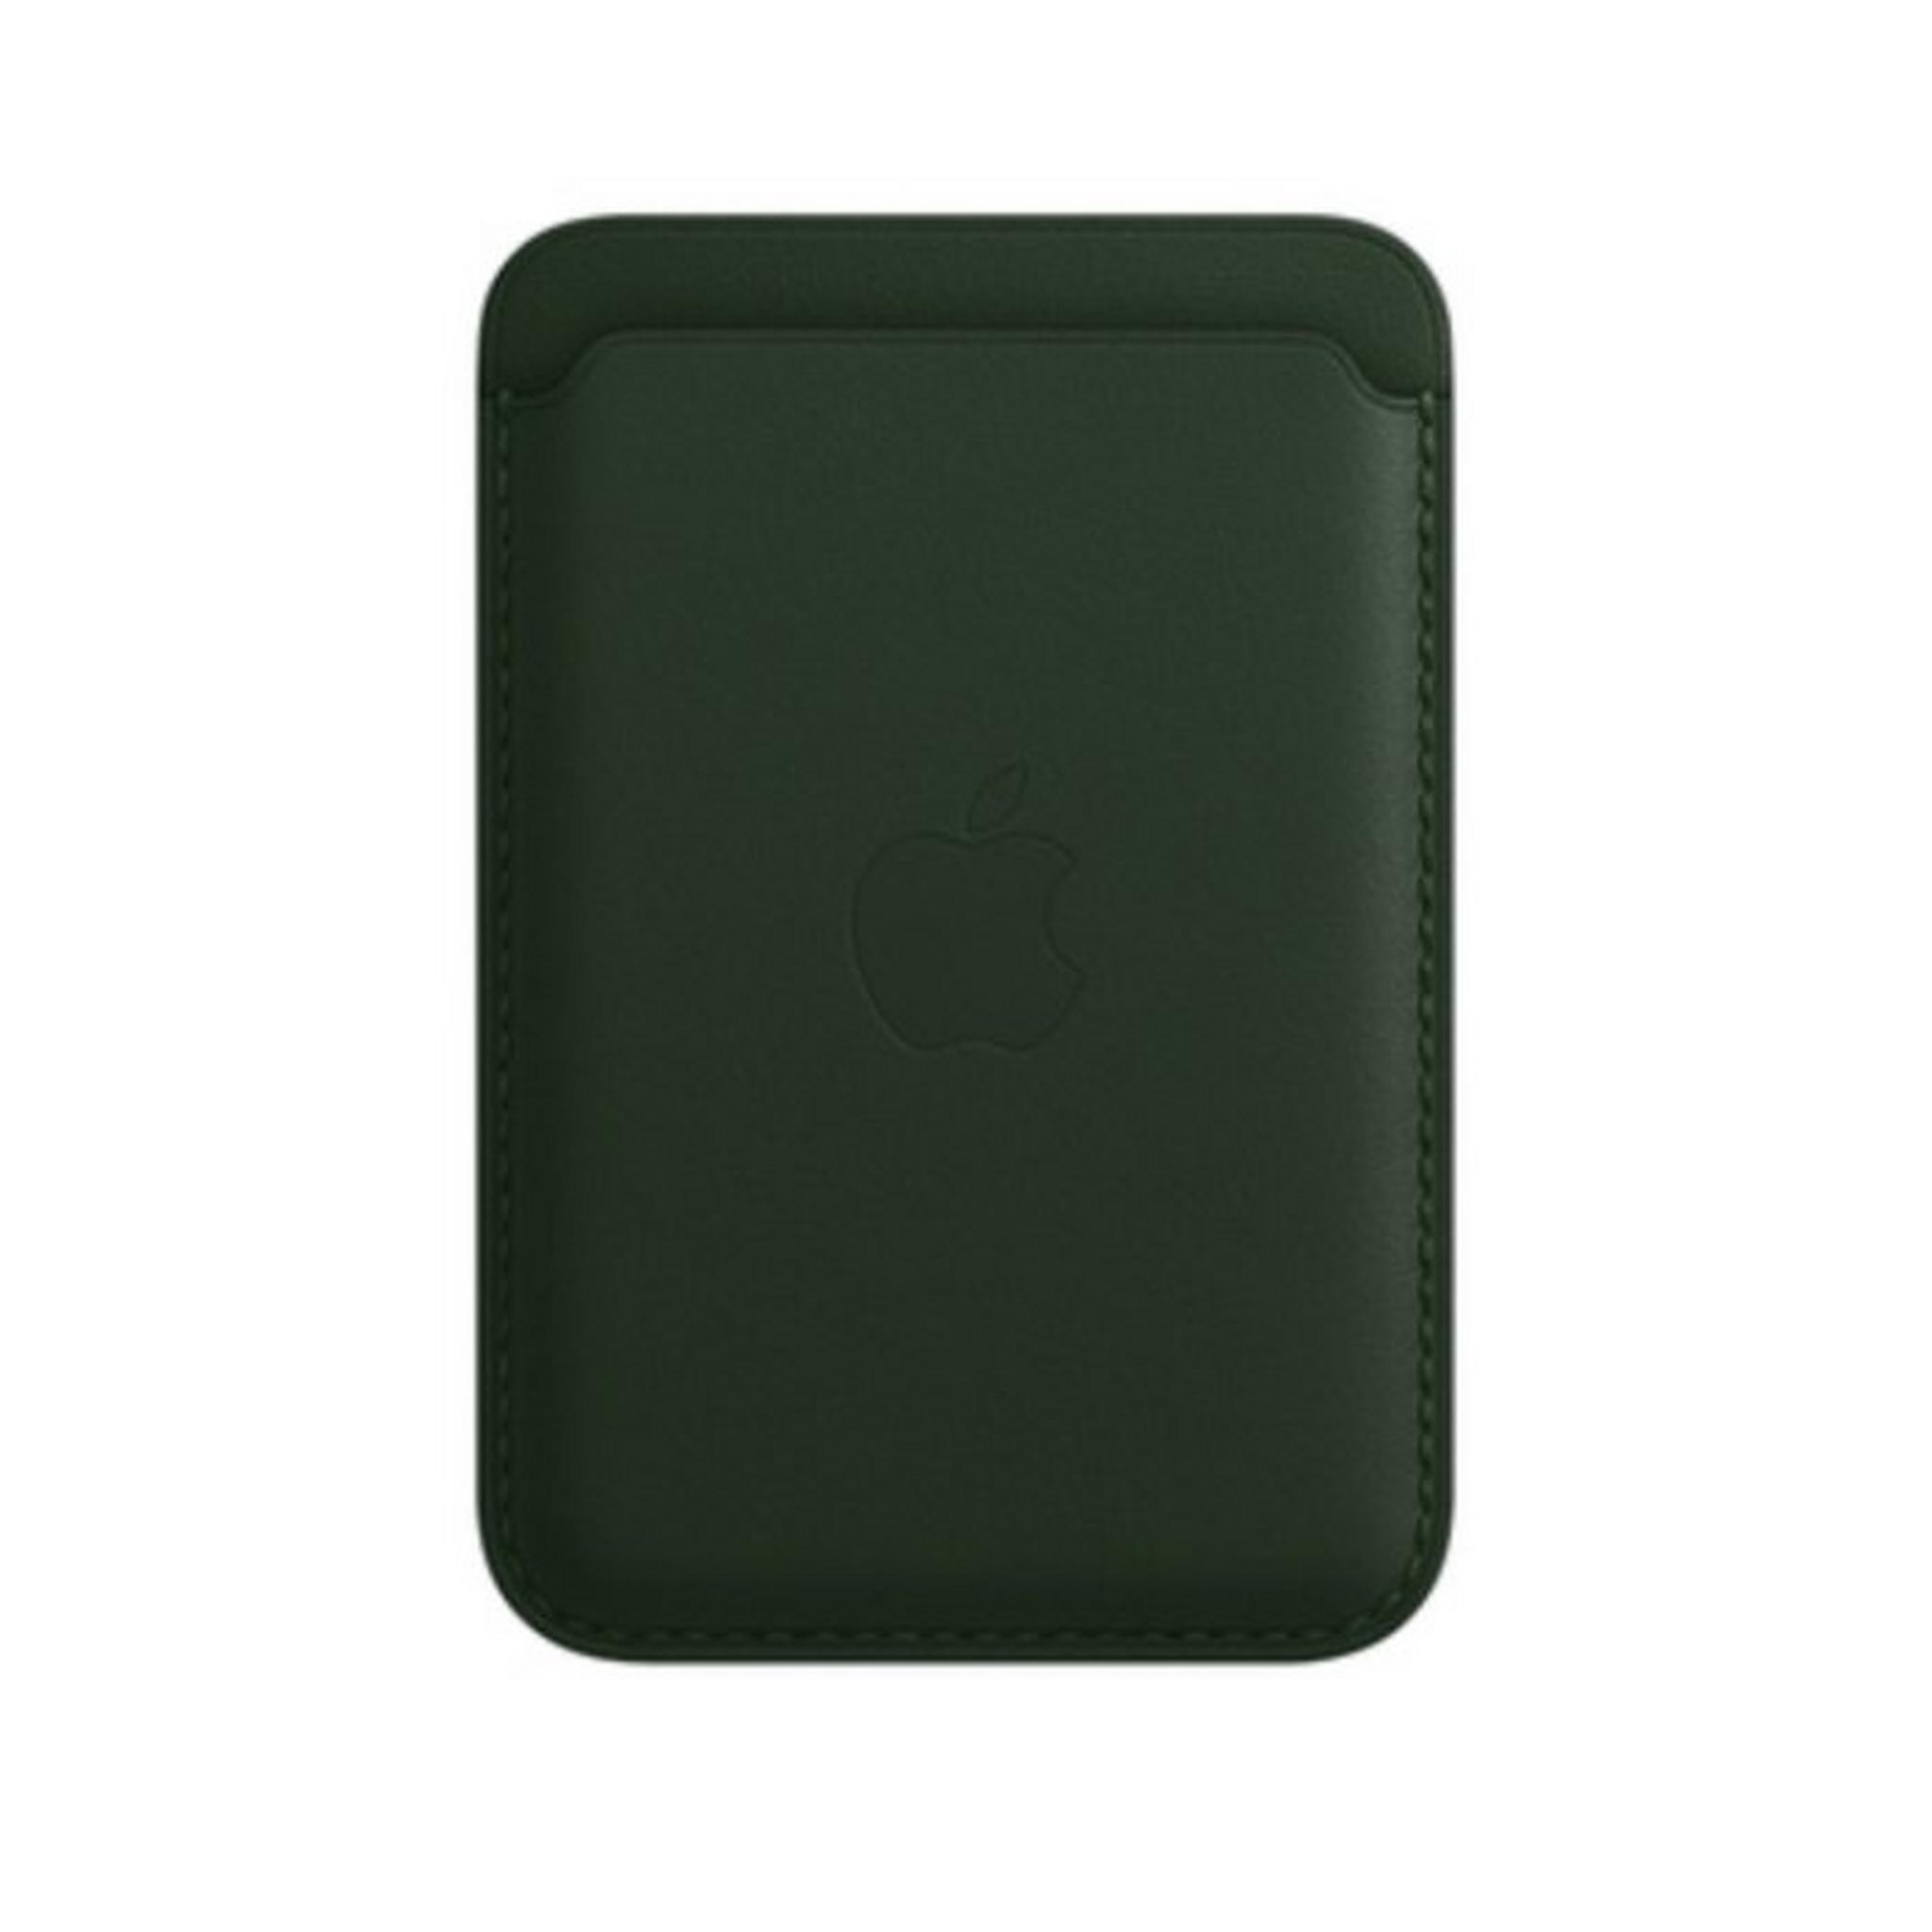 Apple iPhone Magsafe Leather Wallet - Sequoia Green